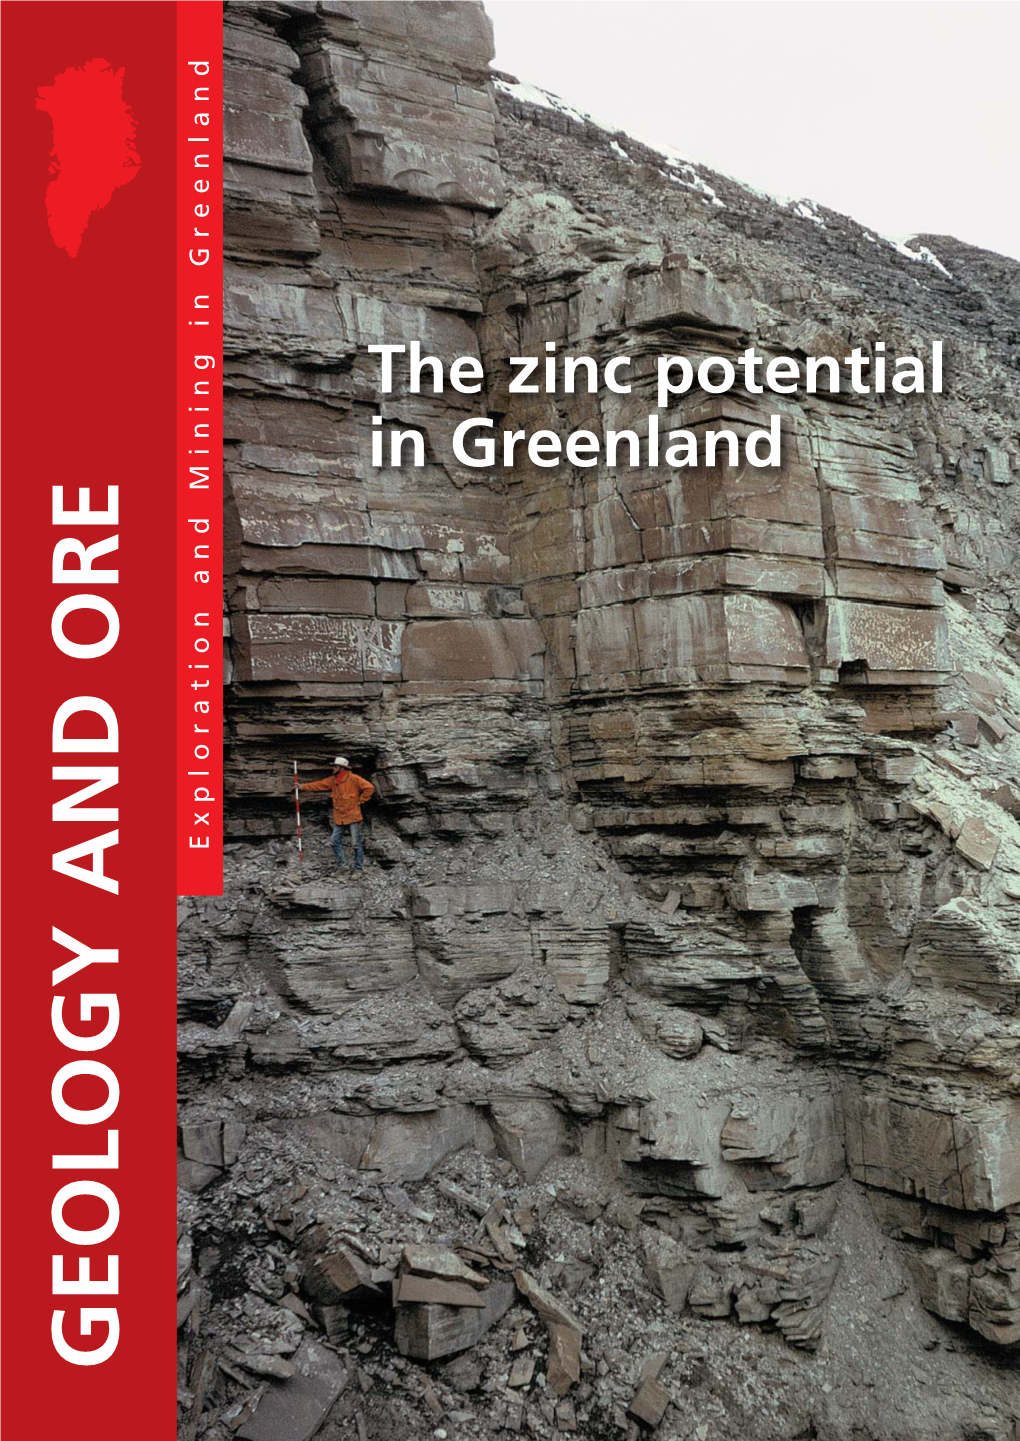 The Zinc Potential in Greenland GO 30 NY.Qxp GO 30 27/02/18 10.08 Side 2